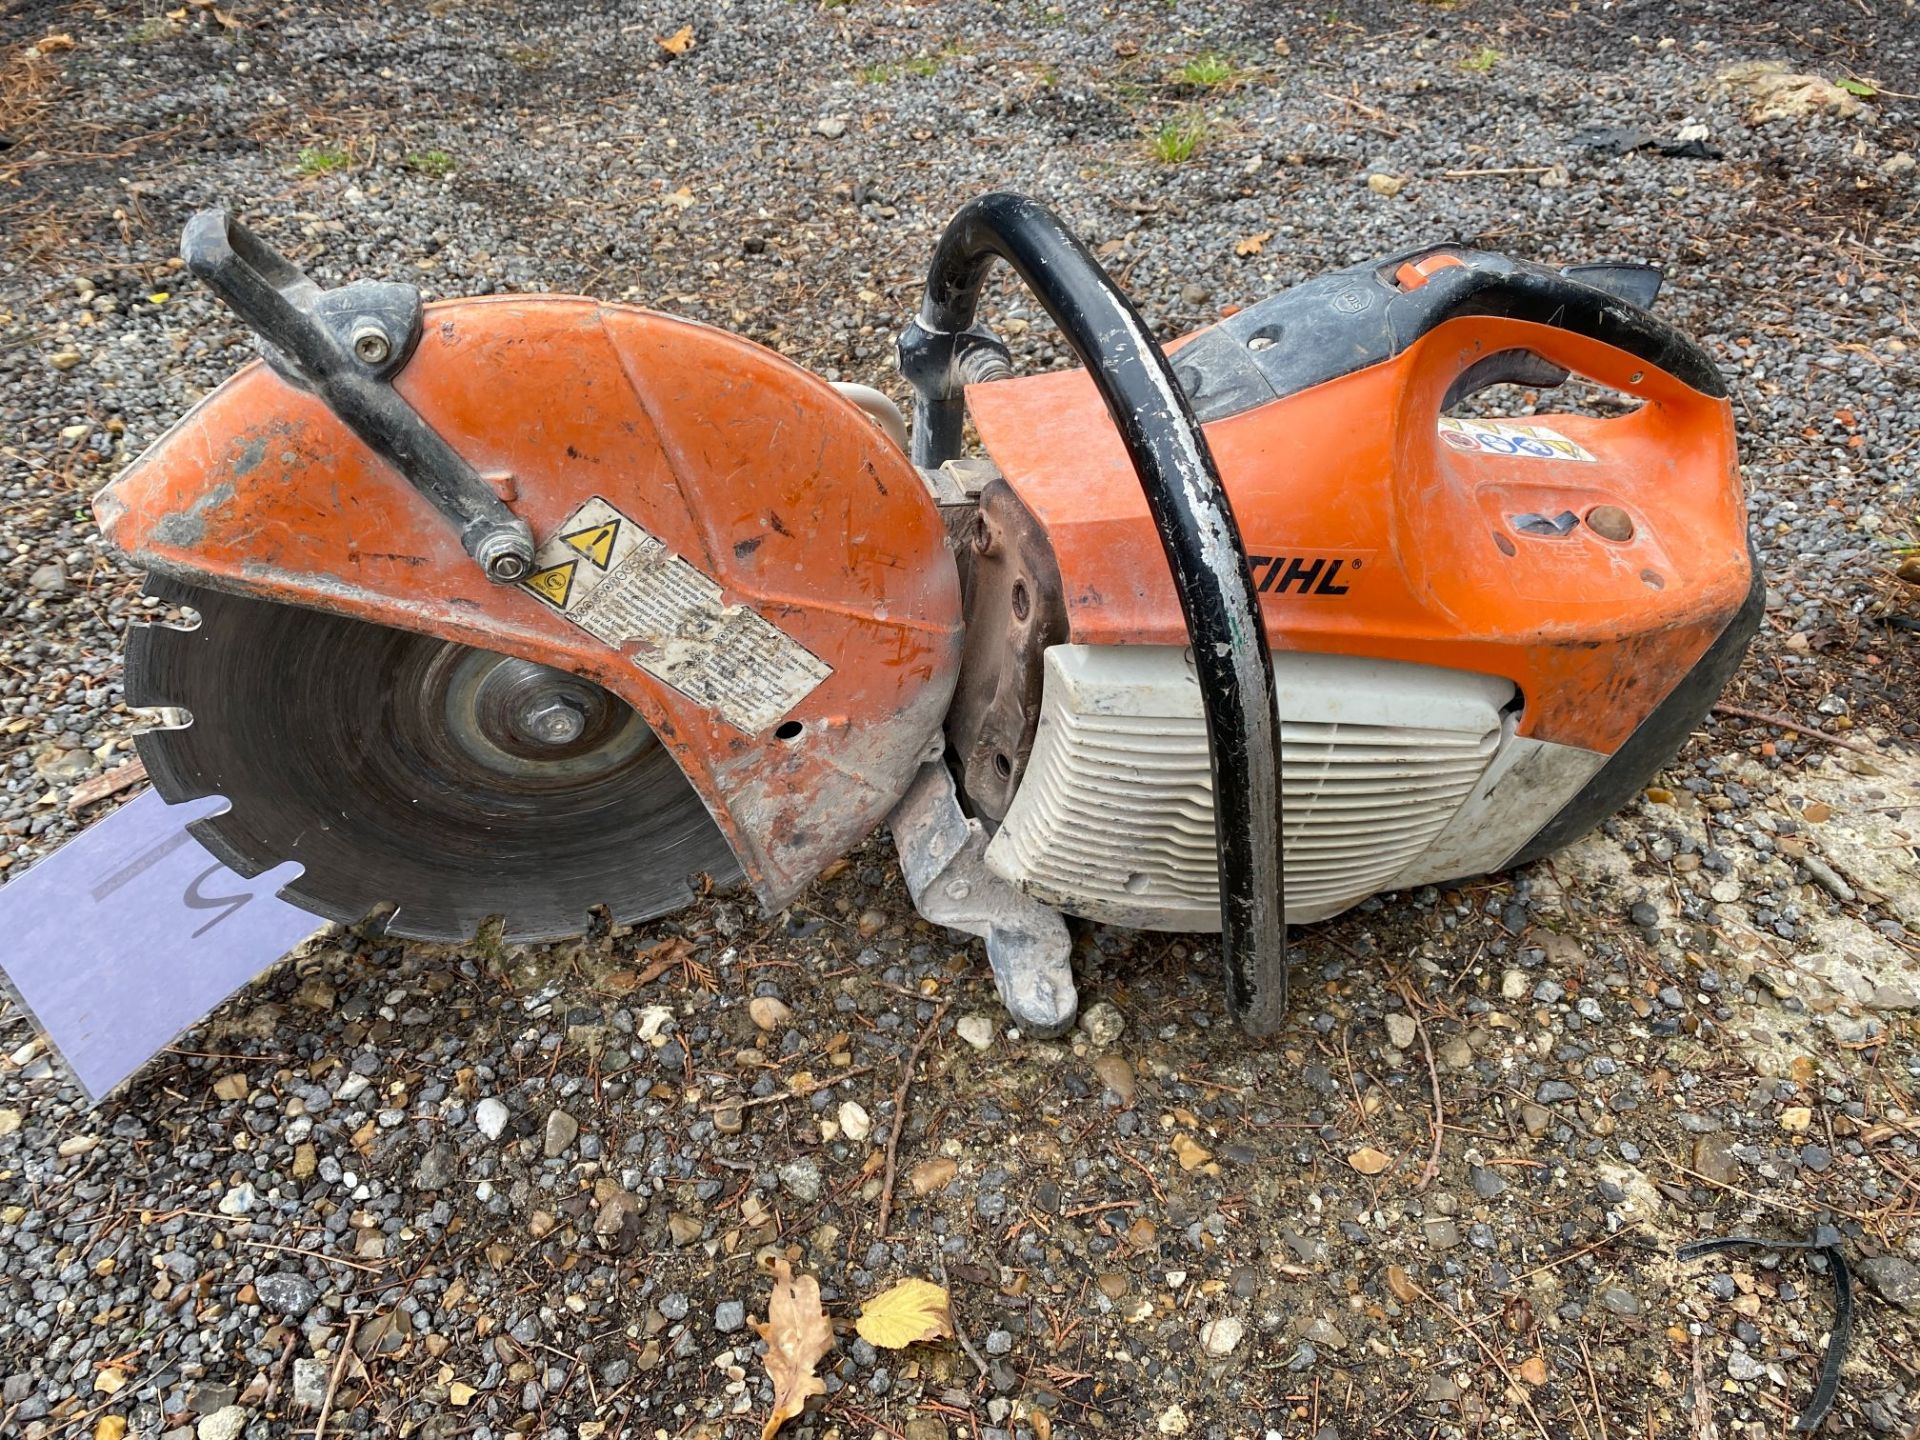 Stihl petrol cutter (no plate details available) - Image 2 of 2